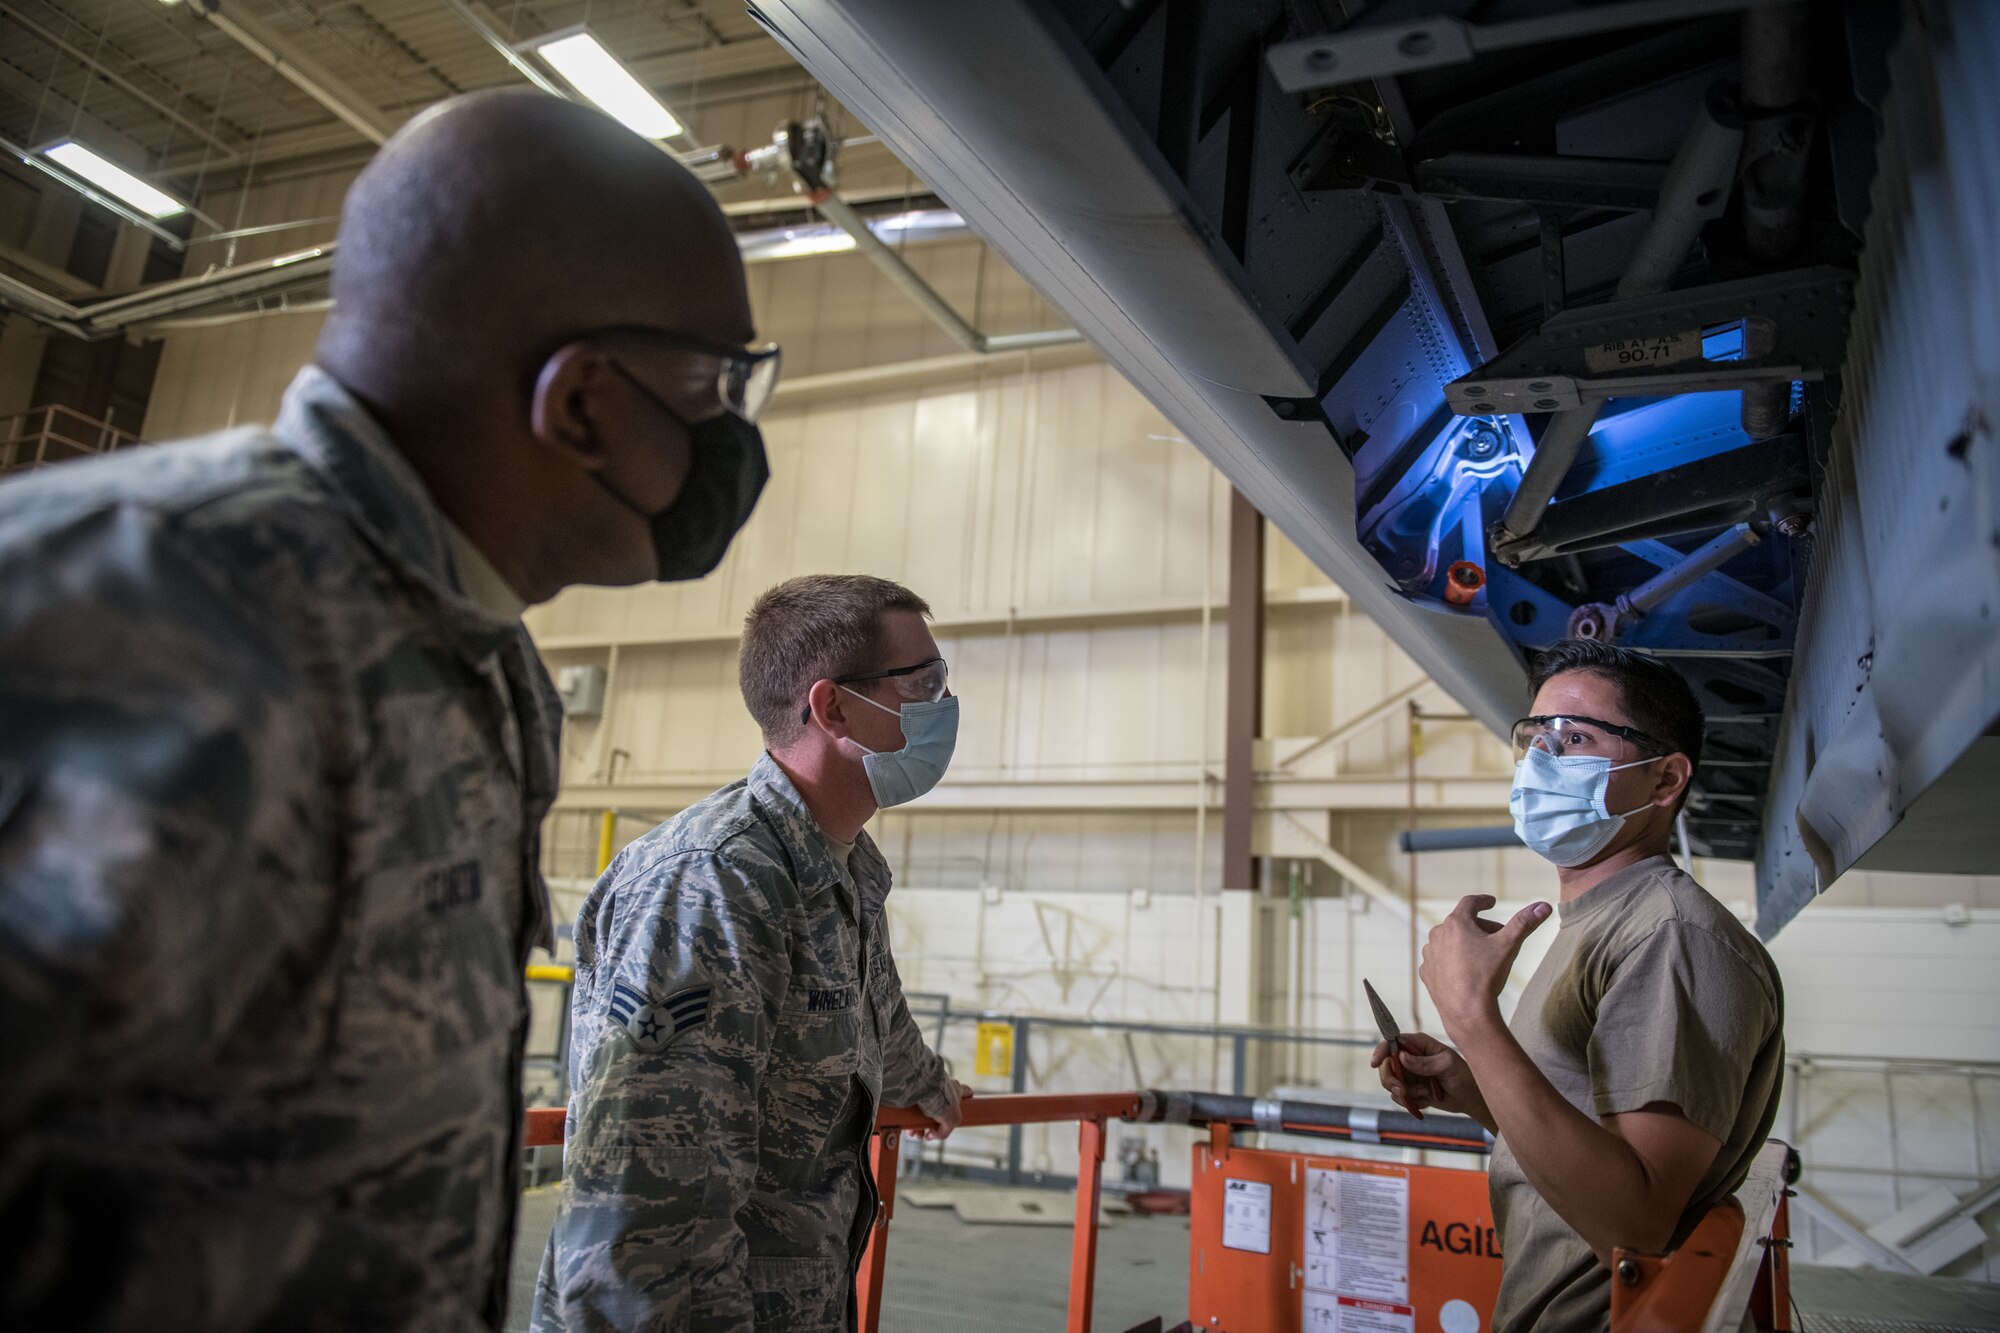 Tech. Sgt. Jesse Zambrano, 302nd Maintenance Squadron C-130 crew chief, right, discusses the process of installing major flight controls in a C-130 Hercules with C-40C crew chiefs, Senior Airman Landon Wineland, middle, and Senior Airman Earnest Carter, both from the 932nd Maintenance Group, September 16, 2020, Peterson Air Force Base, Colorado.  Citizen Airmen with the 932nd, 910th and 302nd Airlift Wing’s participated in operation centennial summit, to build relations with sister wings.  “The opportunity to see other airframes and learn best practices was a great opportunity,” said Wineland. (U.S. Air Force photo by Master Sgt. Christopher Parr)